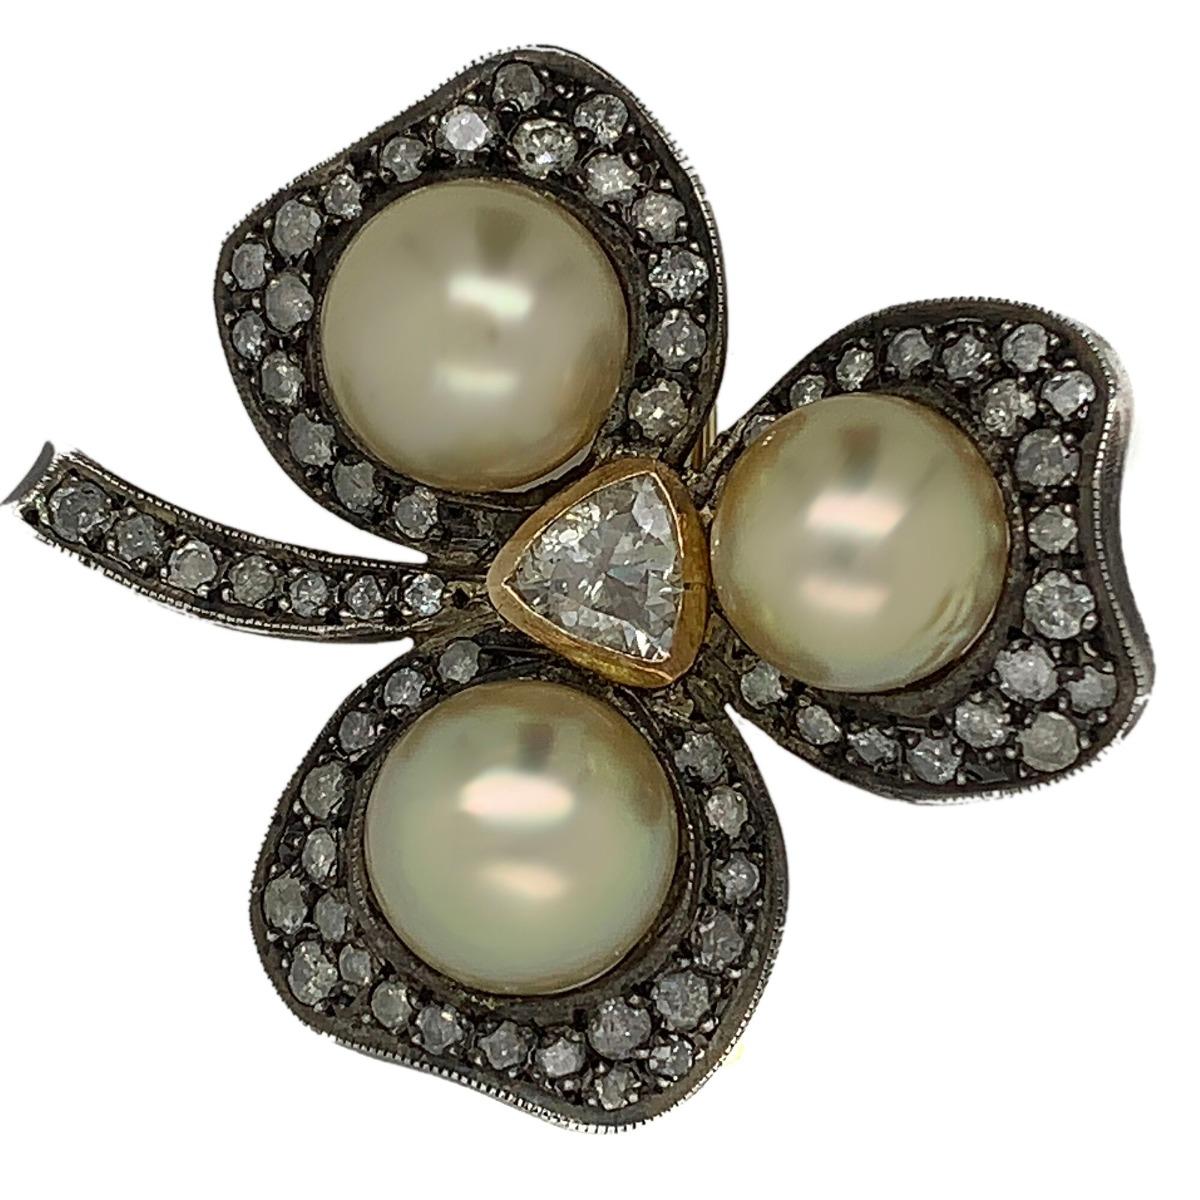 Metal: Silver & Gold
Condition: Excellent
Year Of Manufacture: Circa 1950s
Gemstone: Diamond, Cultured Pearl 
Cut : Rose
Total Diamond Weight: 3 CT
Item Weight: 20.5 grams
Length: 1.8 inches
Petal Width: 0.79 inches
Pearl Width: 0.48 inches
Total